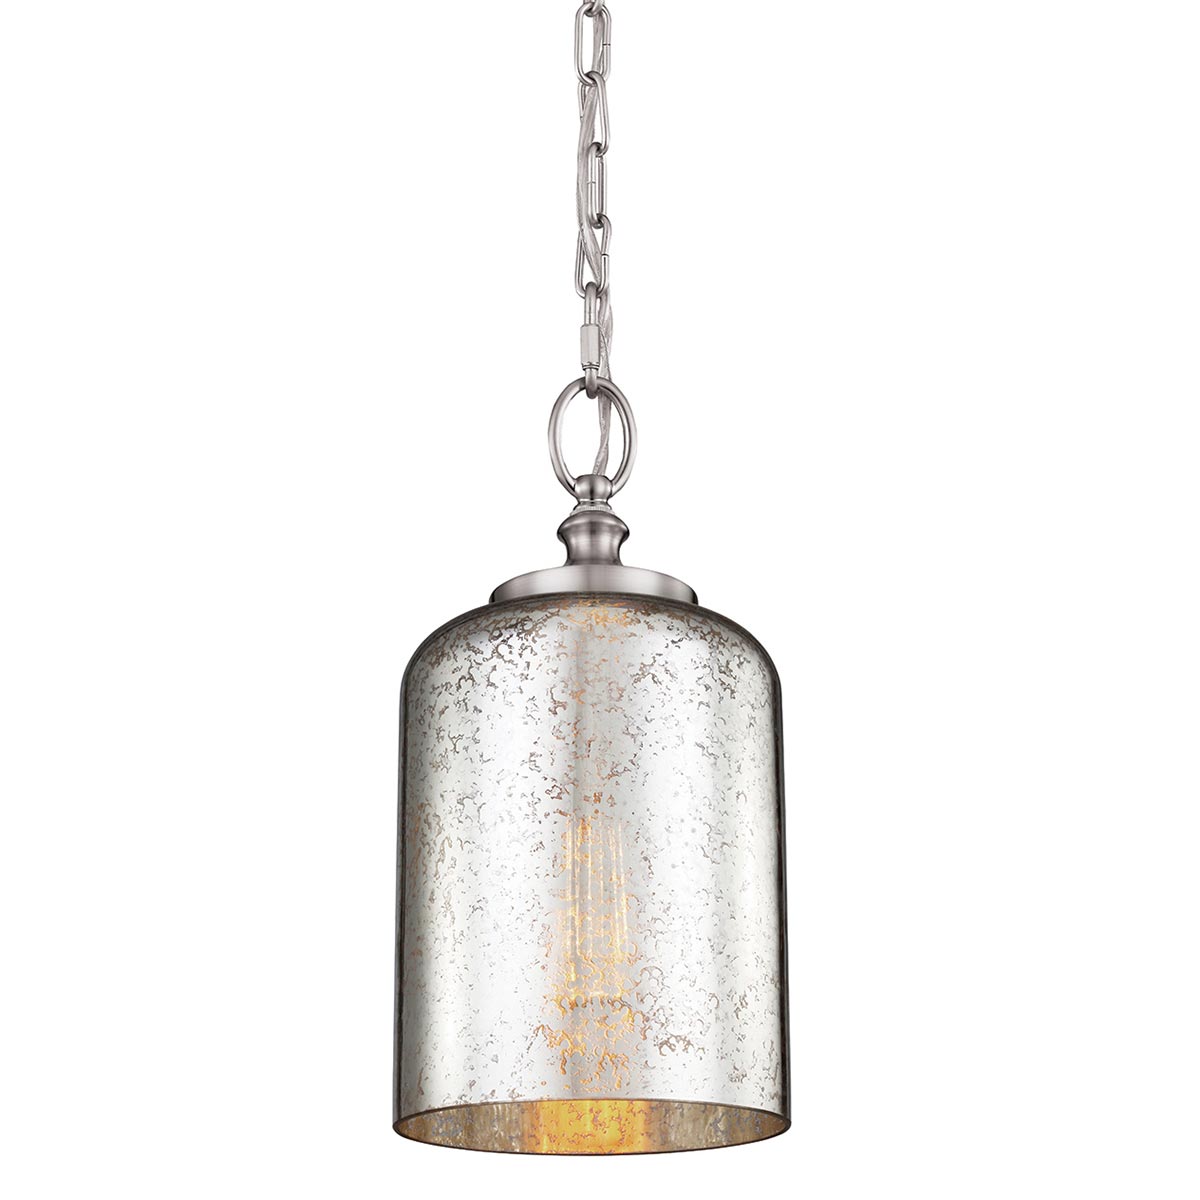 Feiss Hounslow Brushed Steel 1 Light Mini Pendant With Mercury Glass